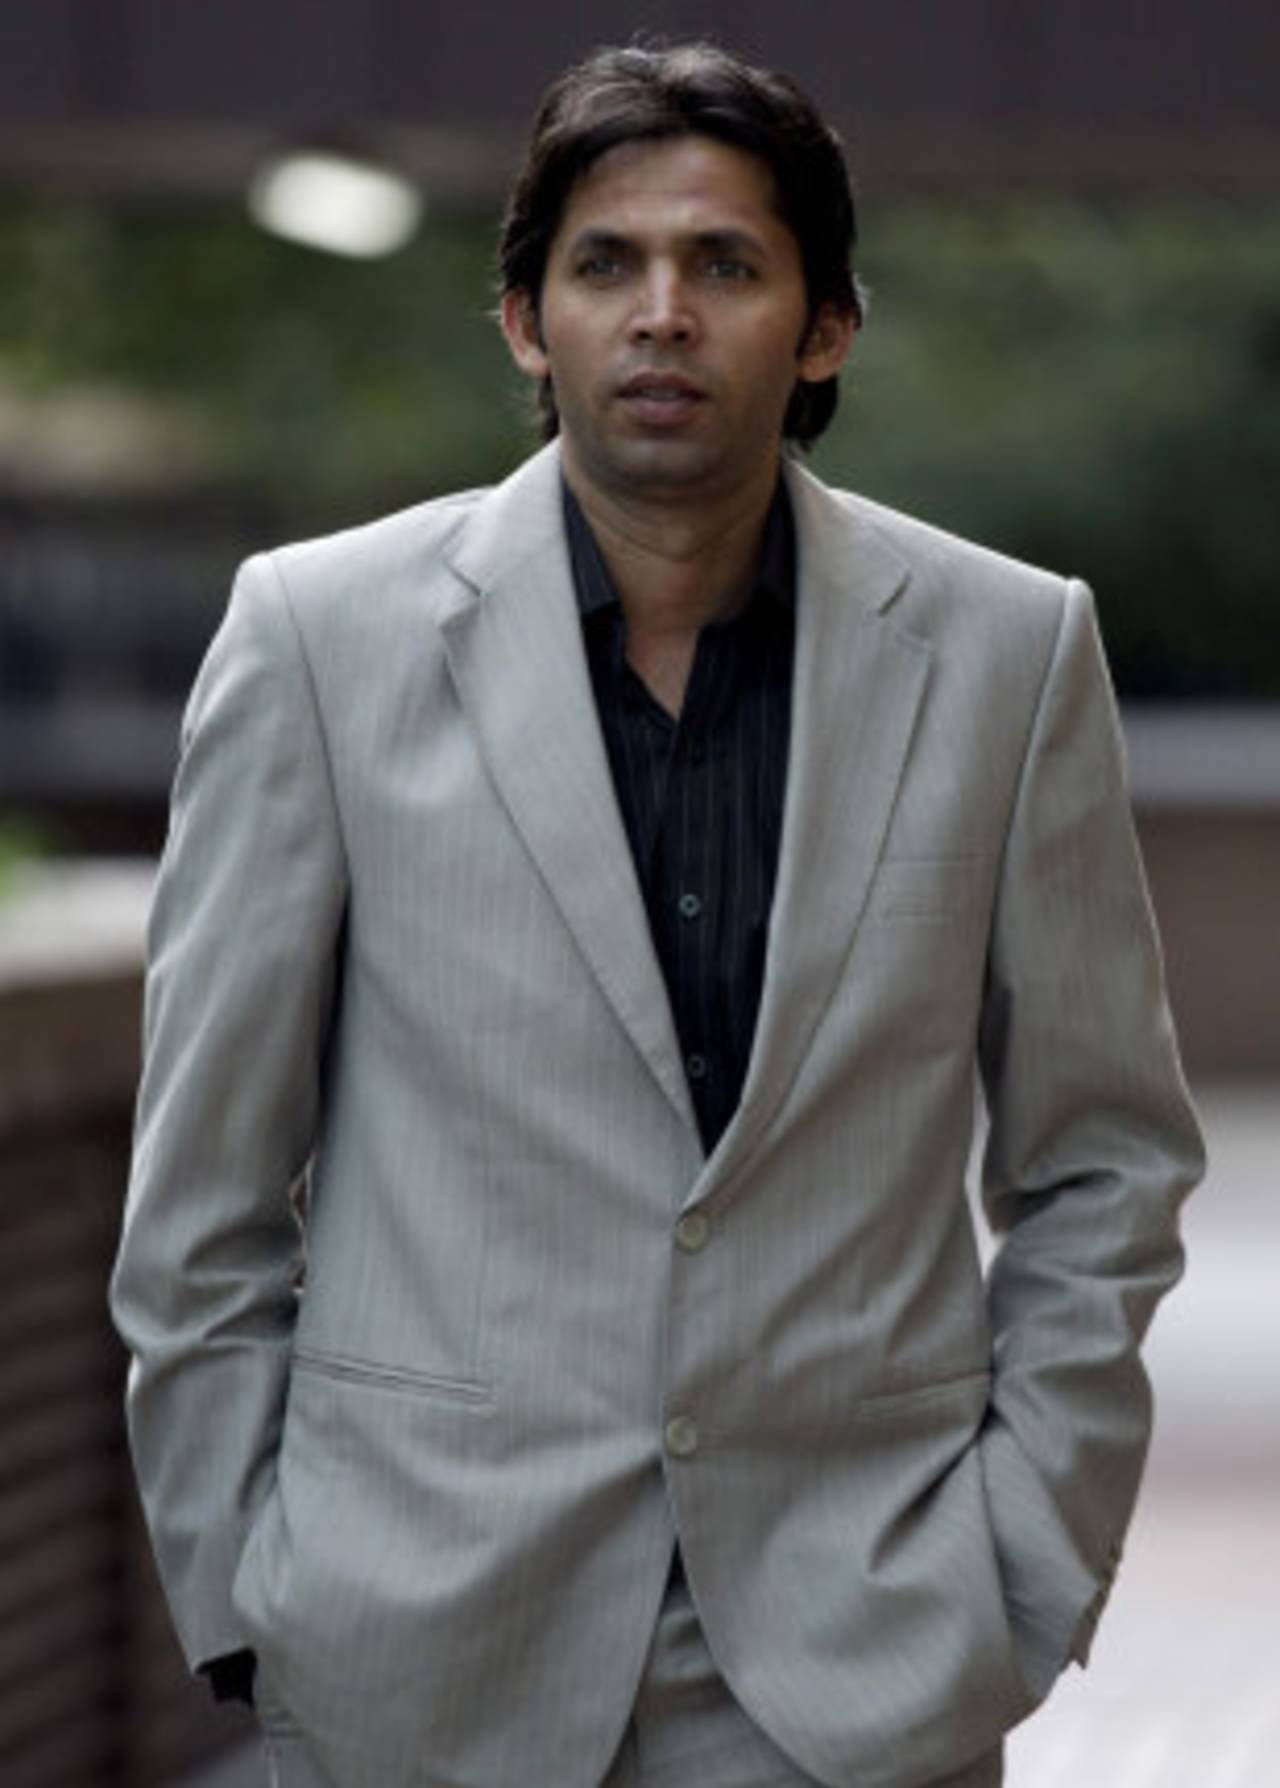 Mohammad Asif endured a tough cross-examination on his second day in the witness stand&nbsp;&nbsp;&bull;&nbsp;&nbsp;Associated Press